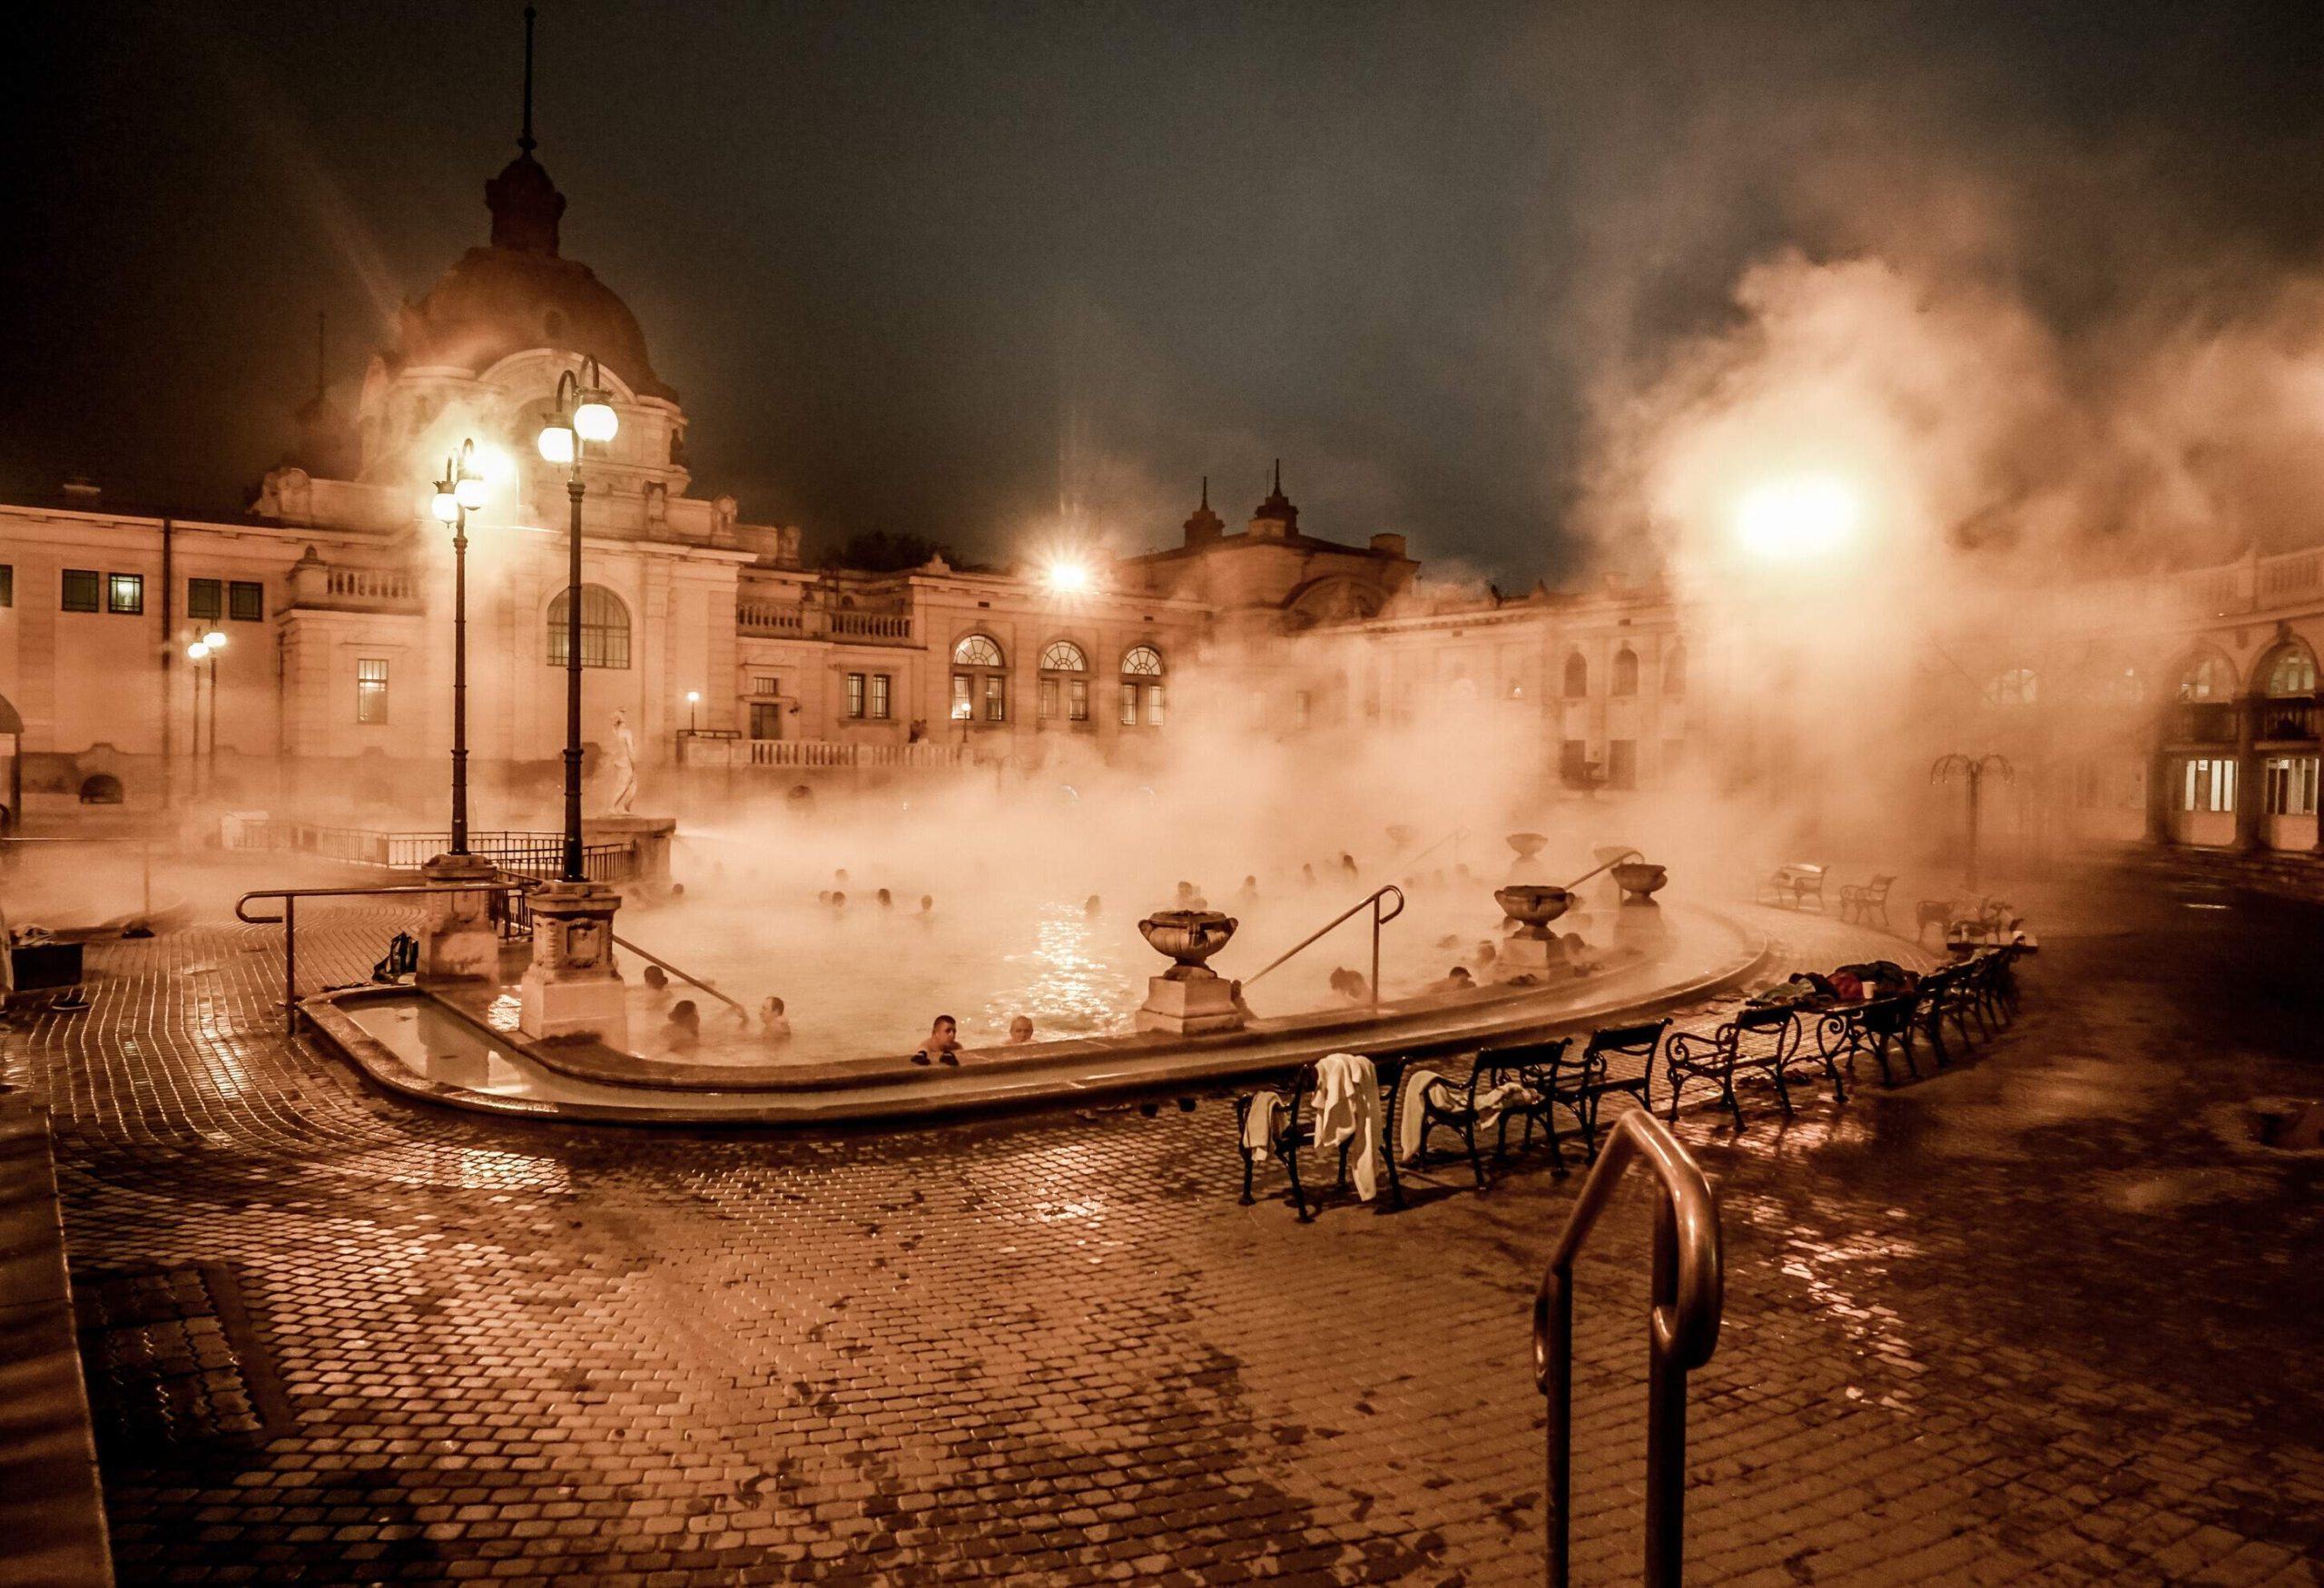 People dip in a thermal pool with a cloud of steam.